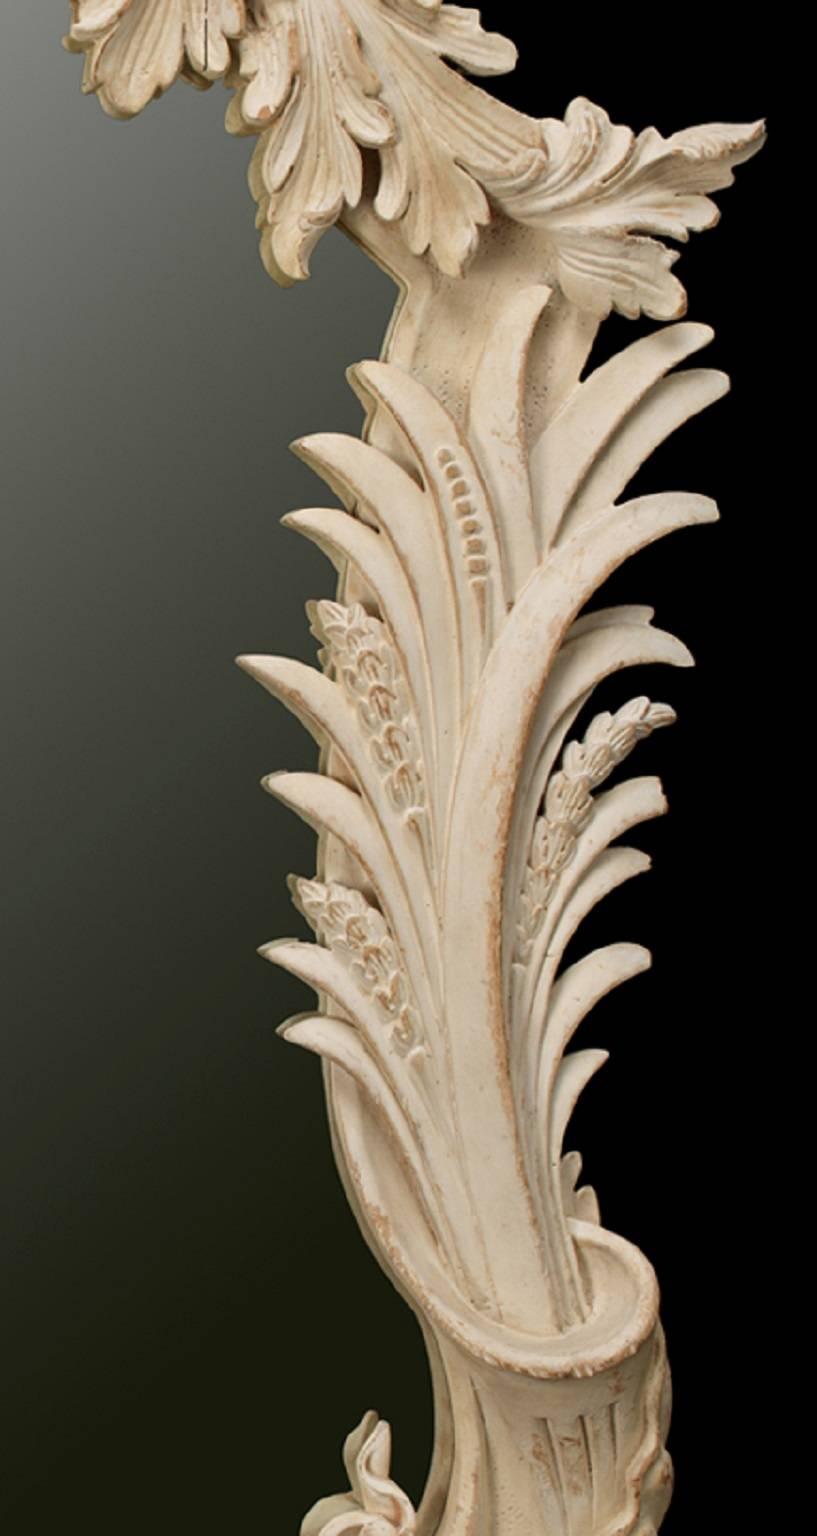 A pair of Vardy mirrors. The frame is carved with scallop shell decoration, centred by a female mask crest above acanthus leaves and cornucopia to the sides. Finished in an aged gesso and distressed paint finish.